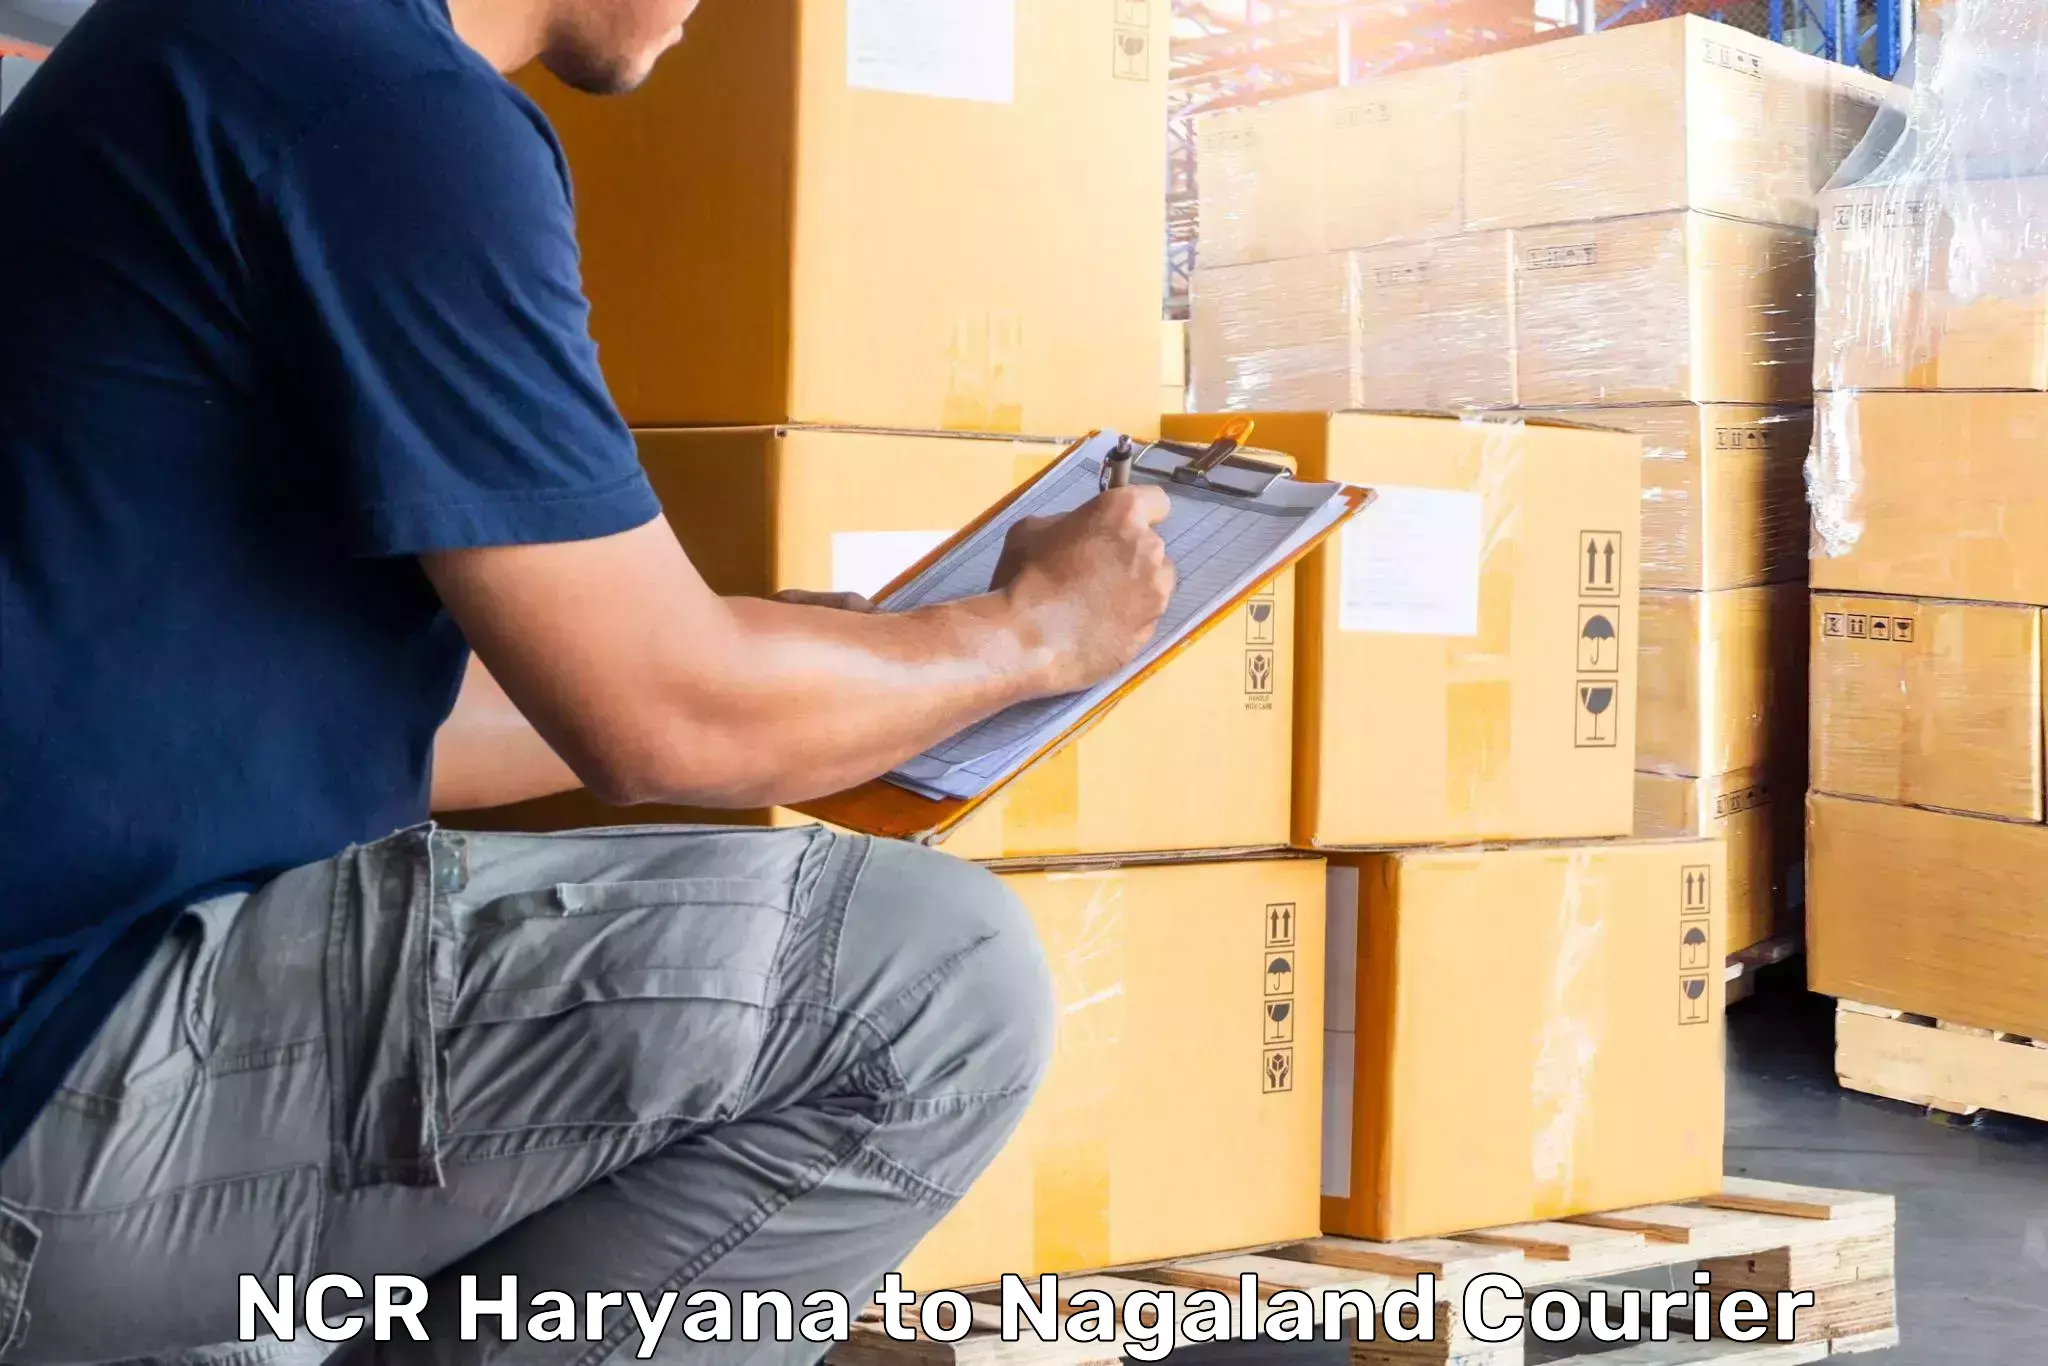 Luggage shipment specialists NCR Haryana to Mon